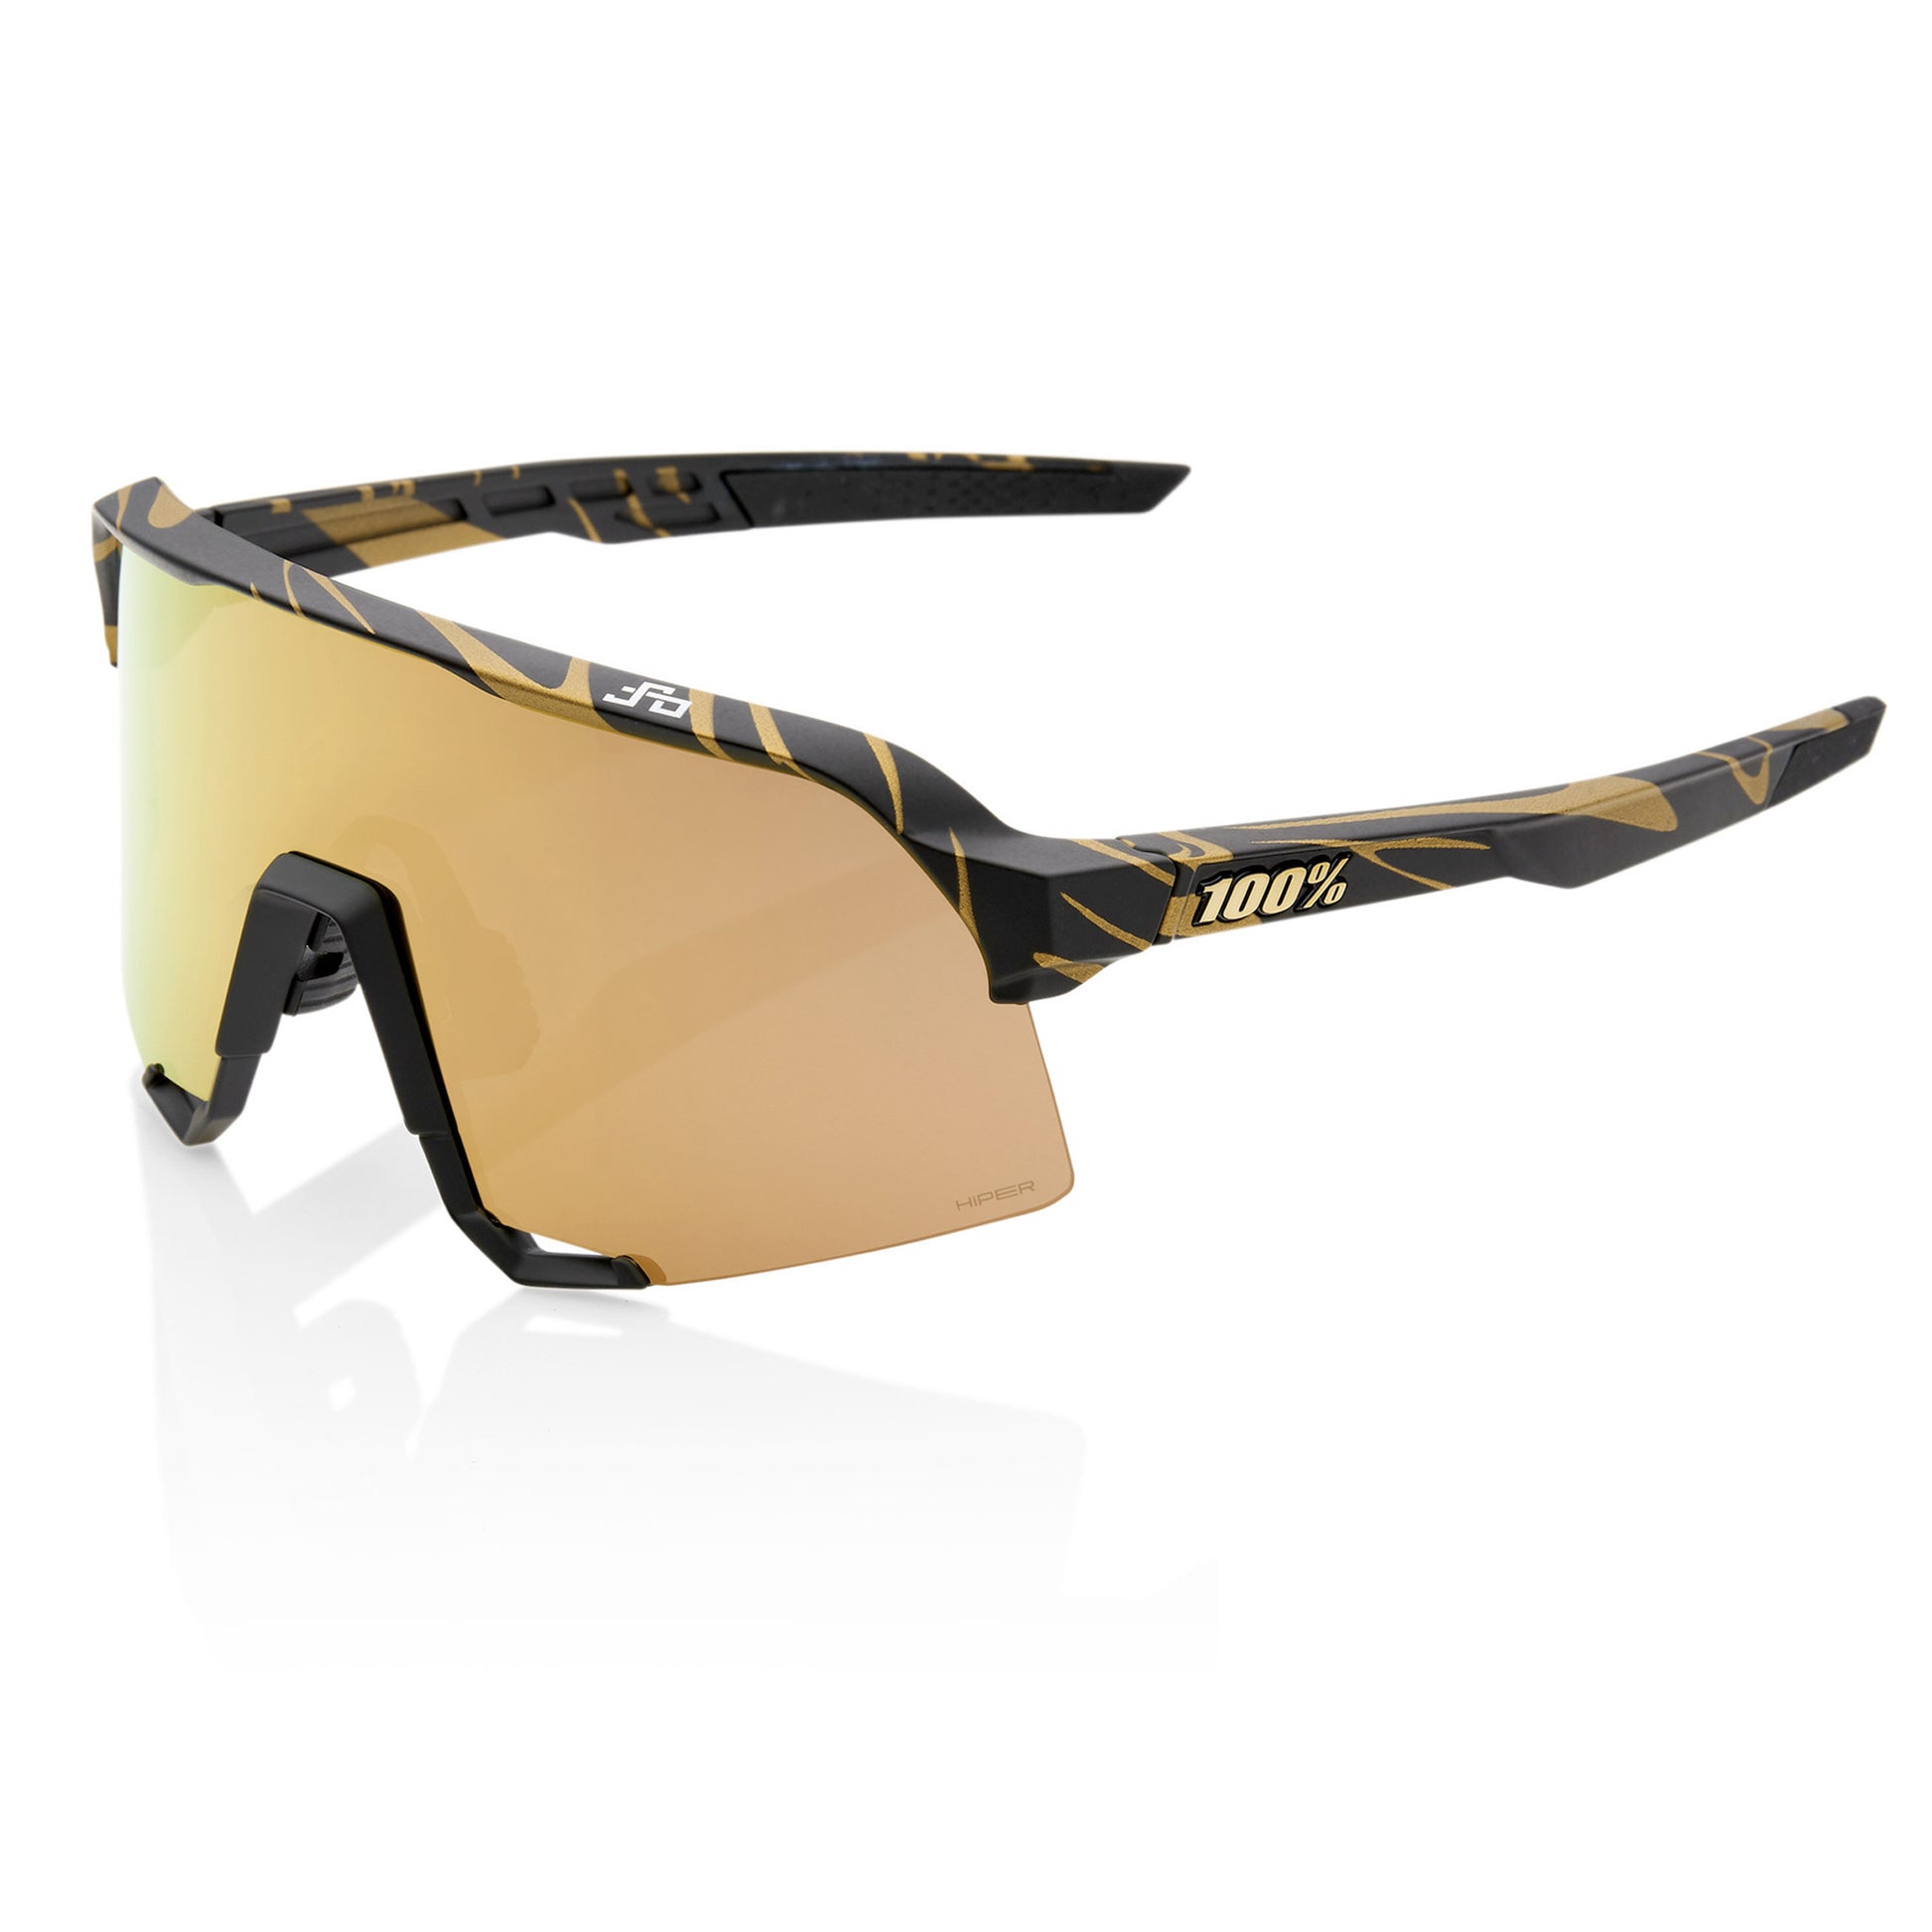 100% S3- Peter Sagan Limited Edition Metallic Gold Flake with HiPER Gold Mirror Lens buy at Woolys Wheels Sydney